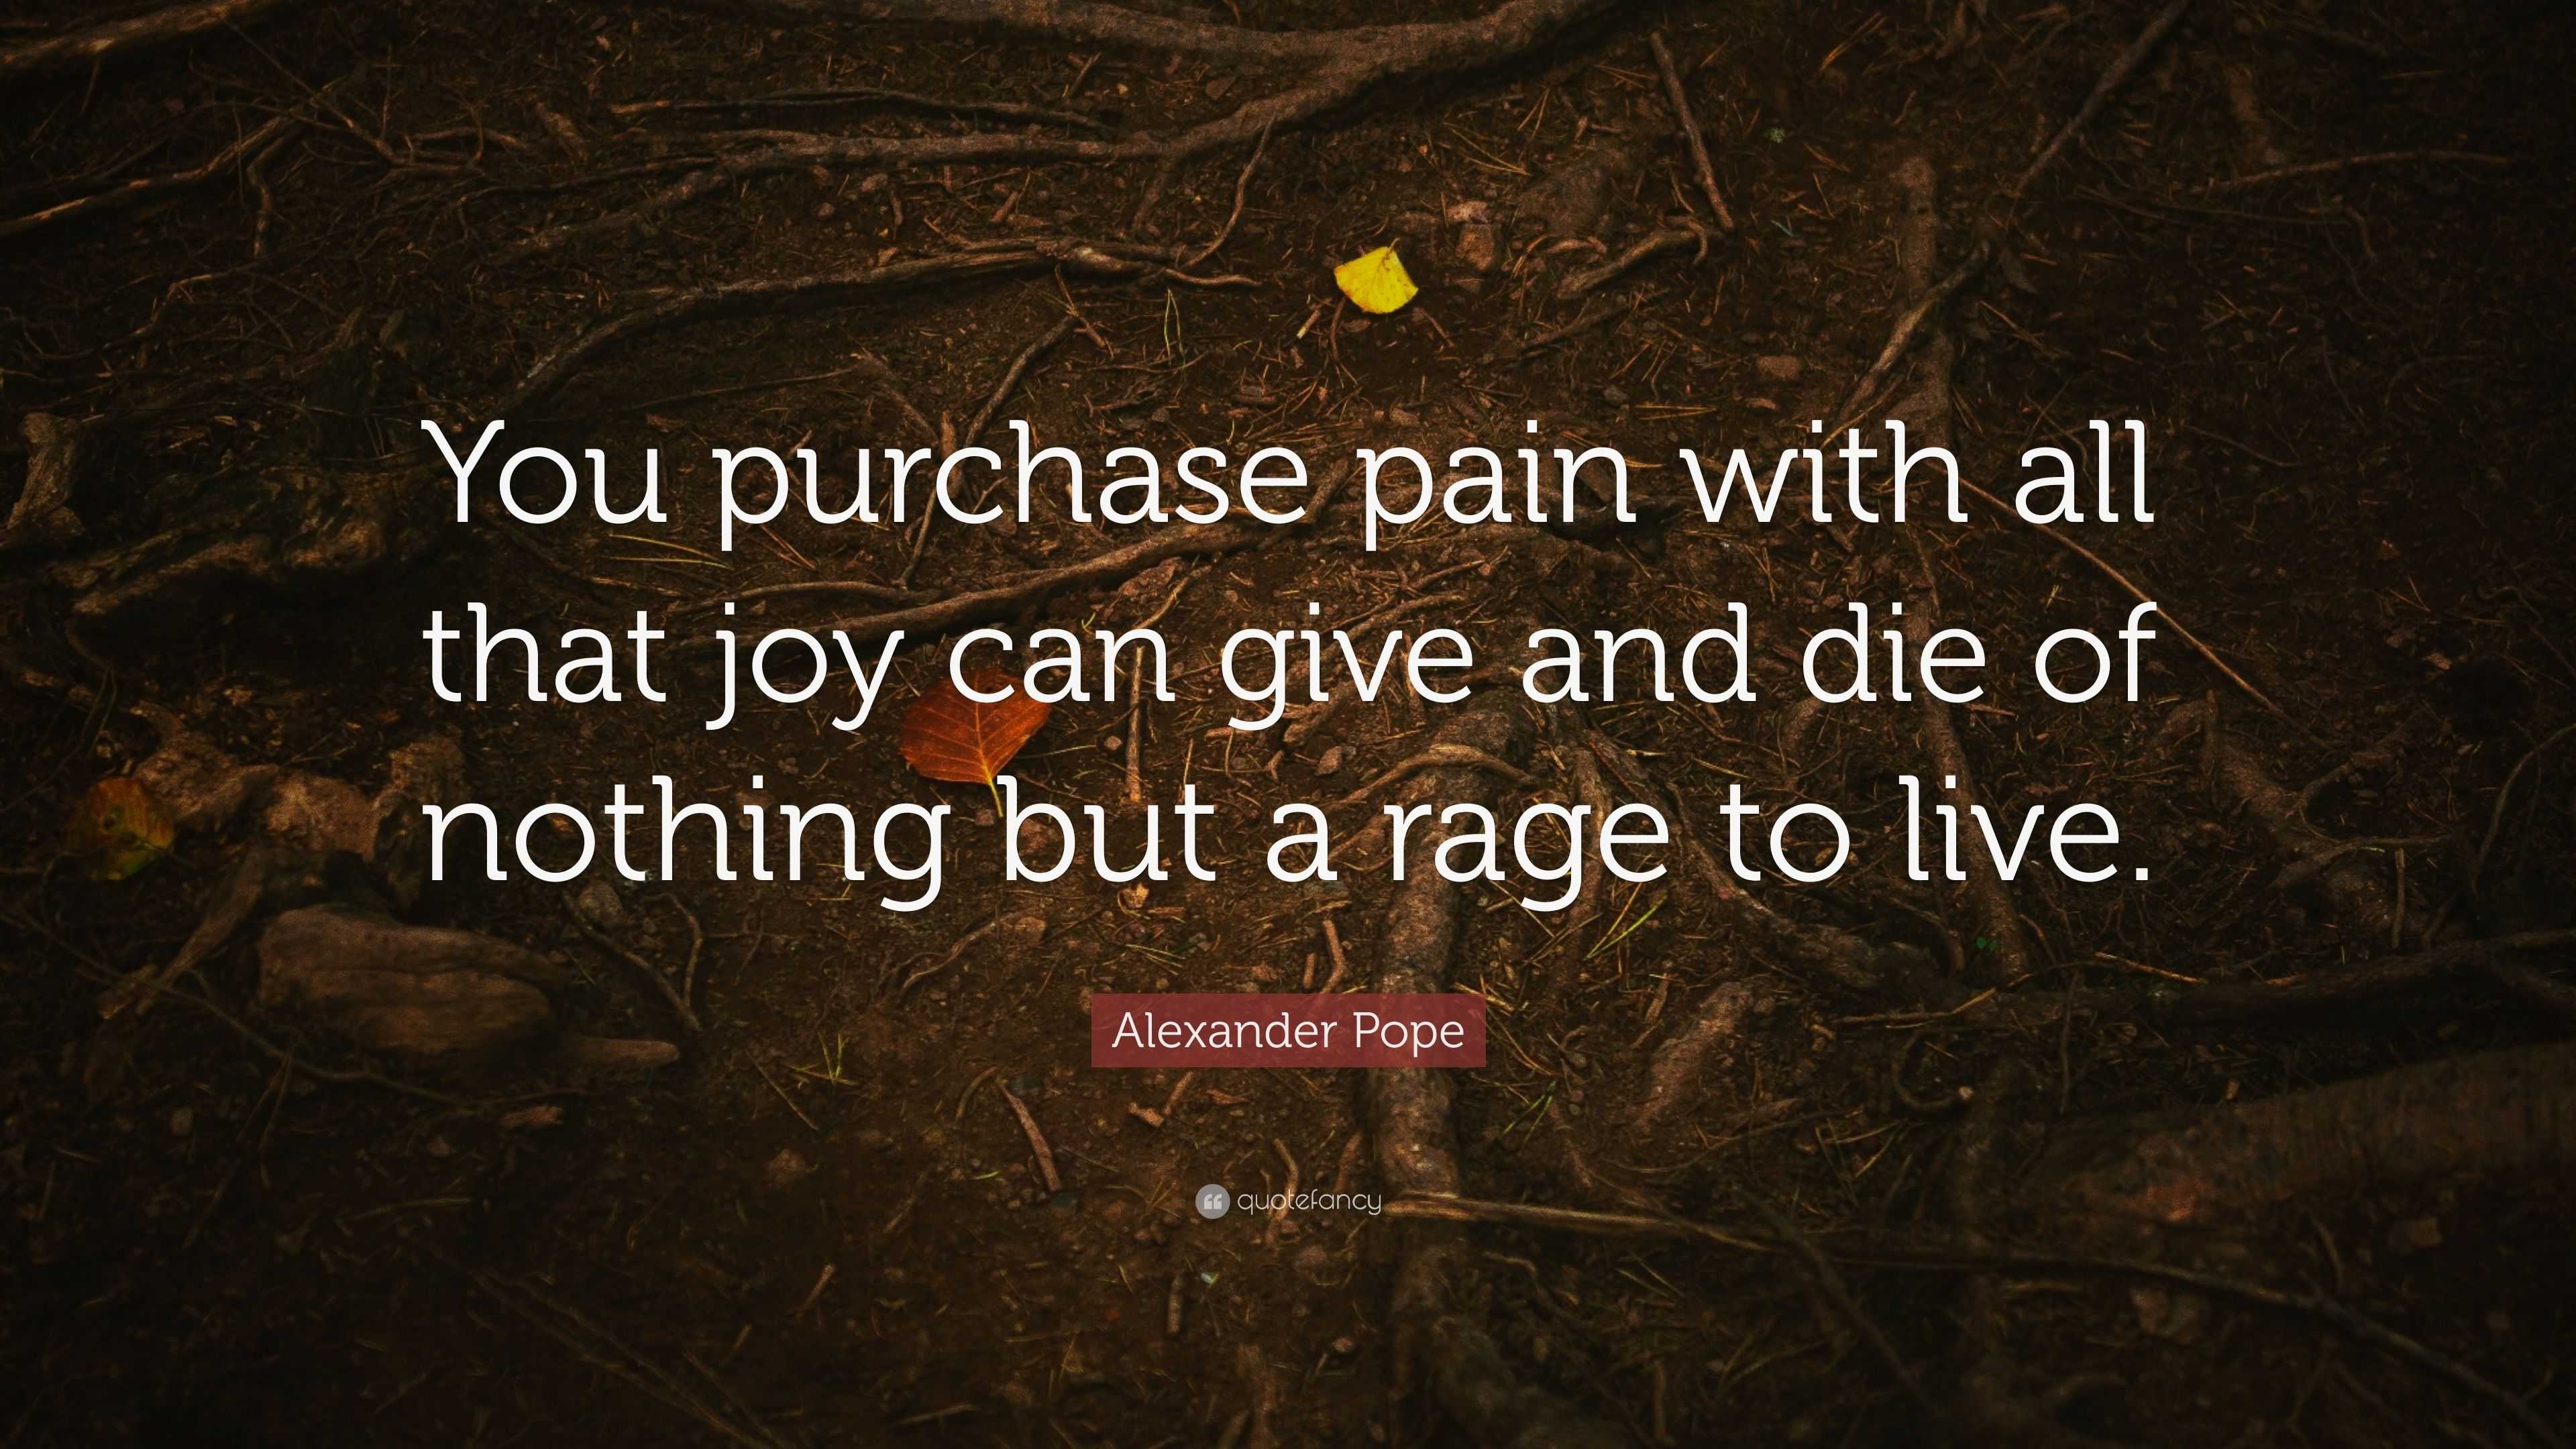 Alexander Pope Quote “You purchase pain with all that joy